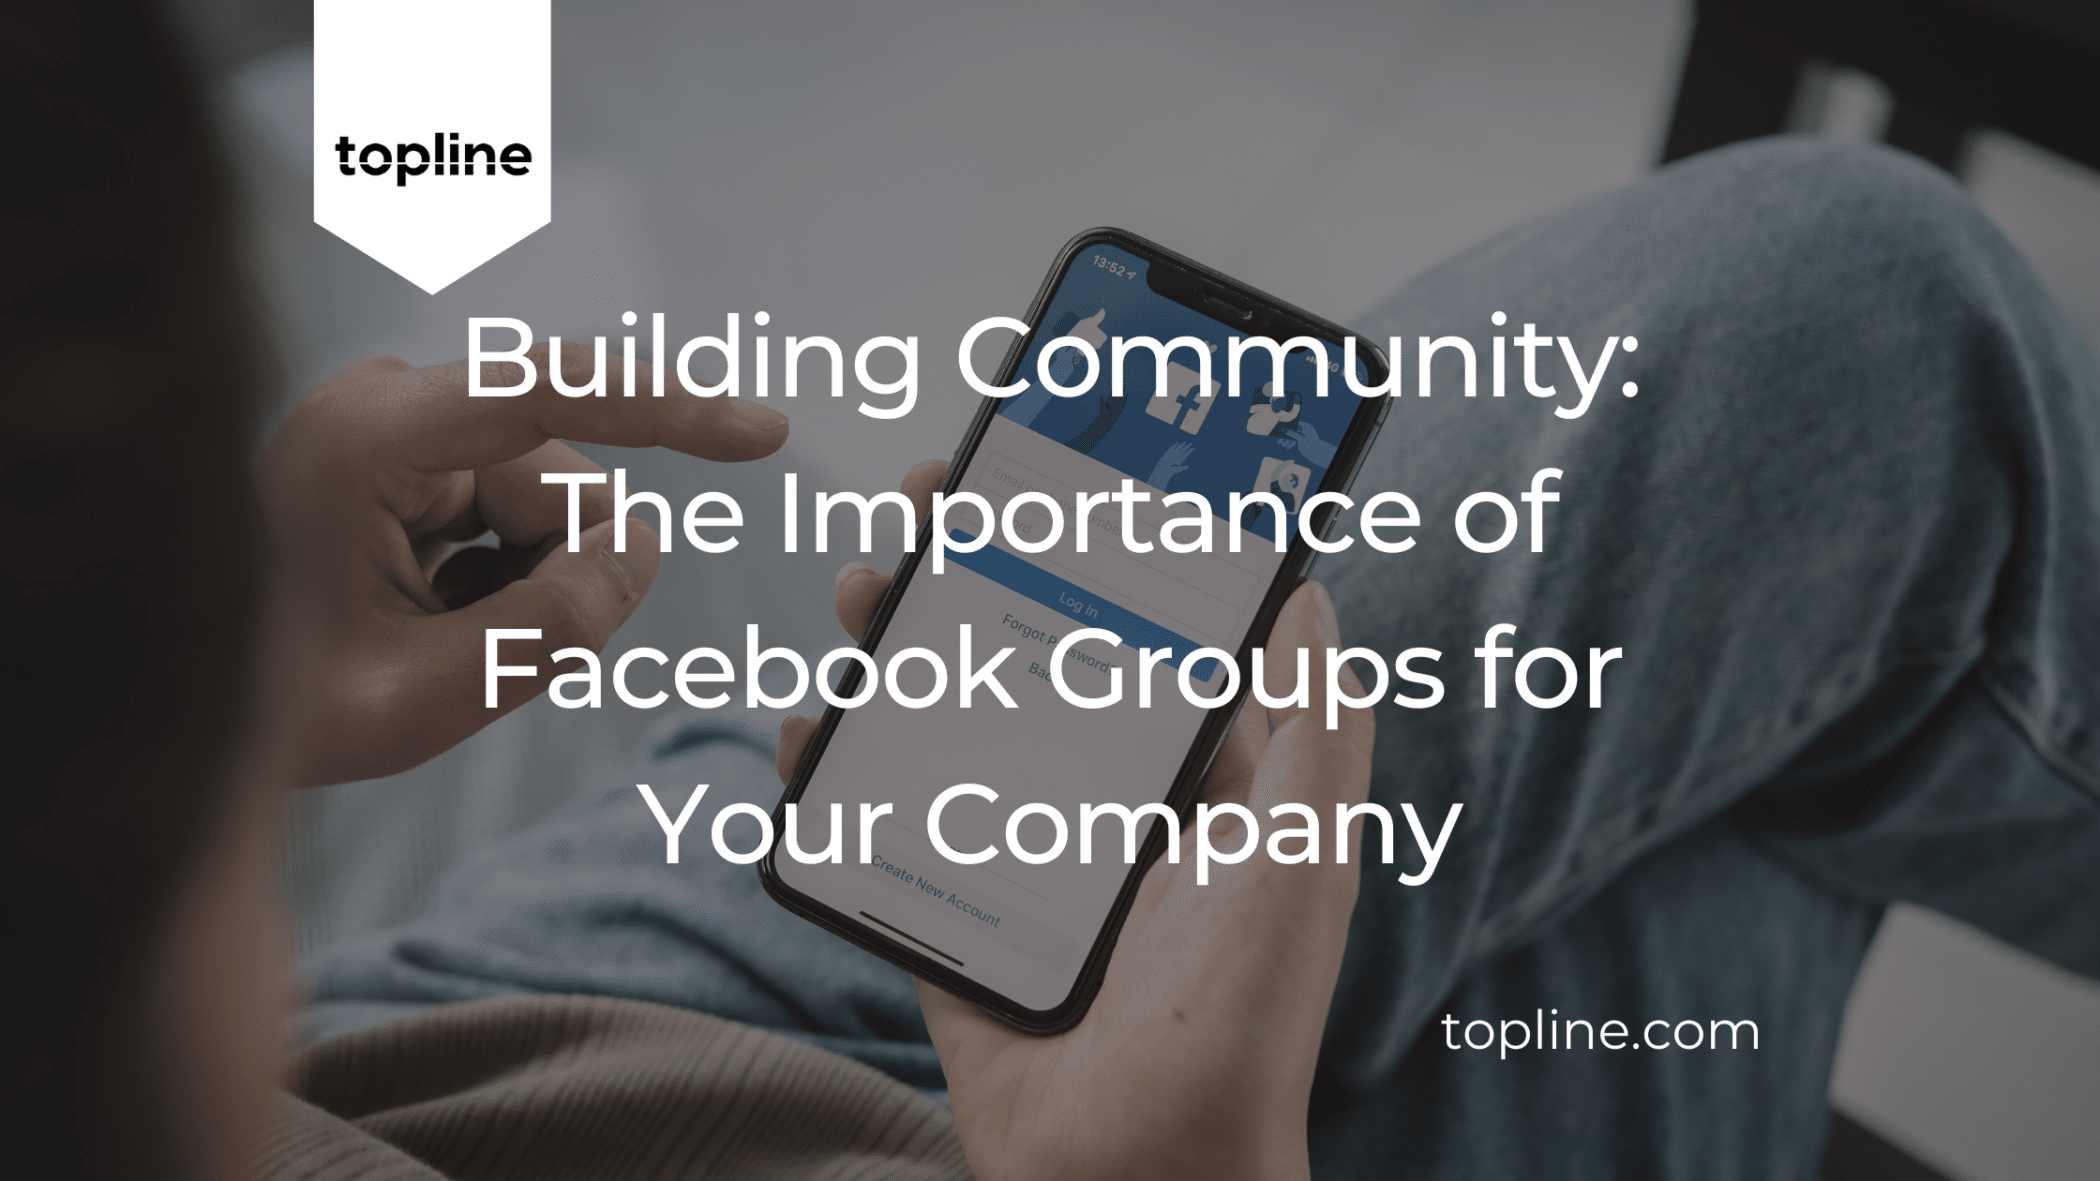 Building Community: The Importance of Facebook Groups for Your Company